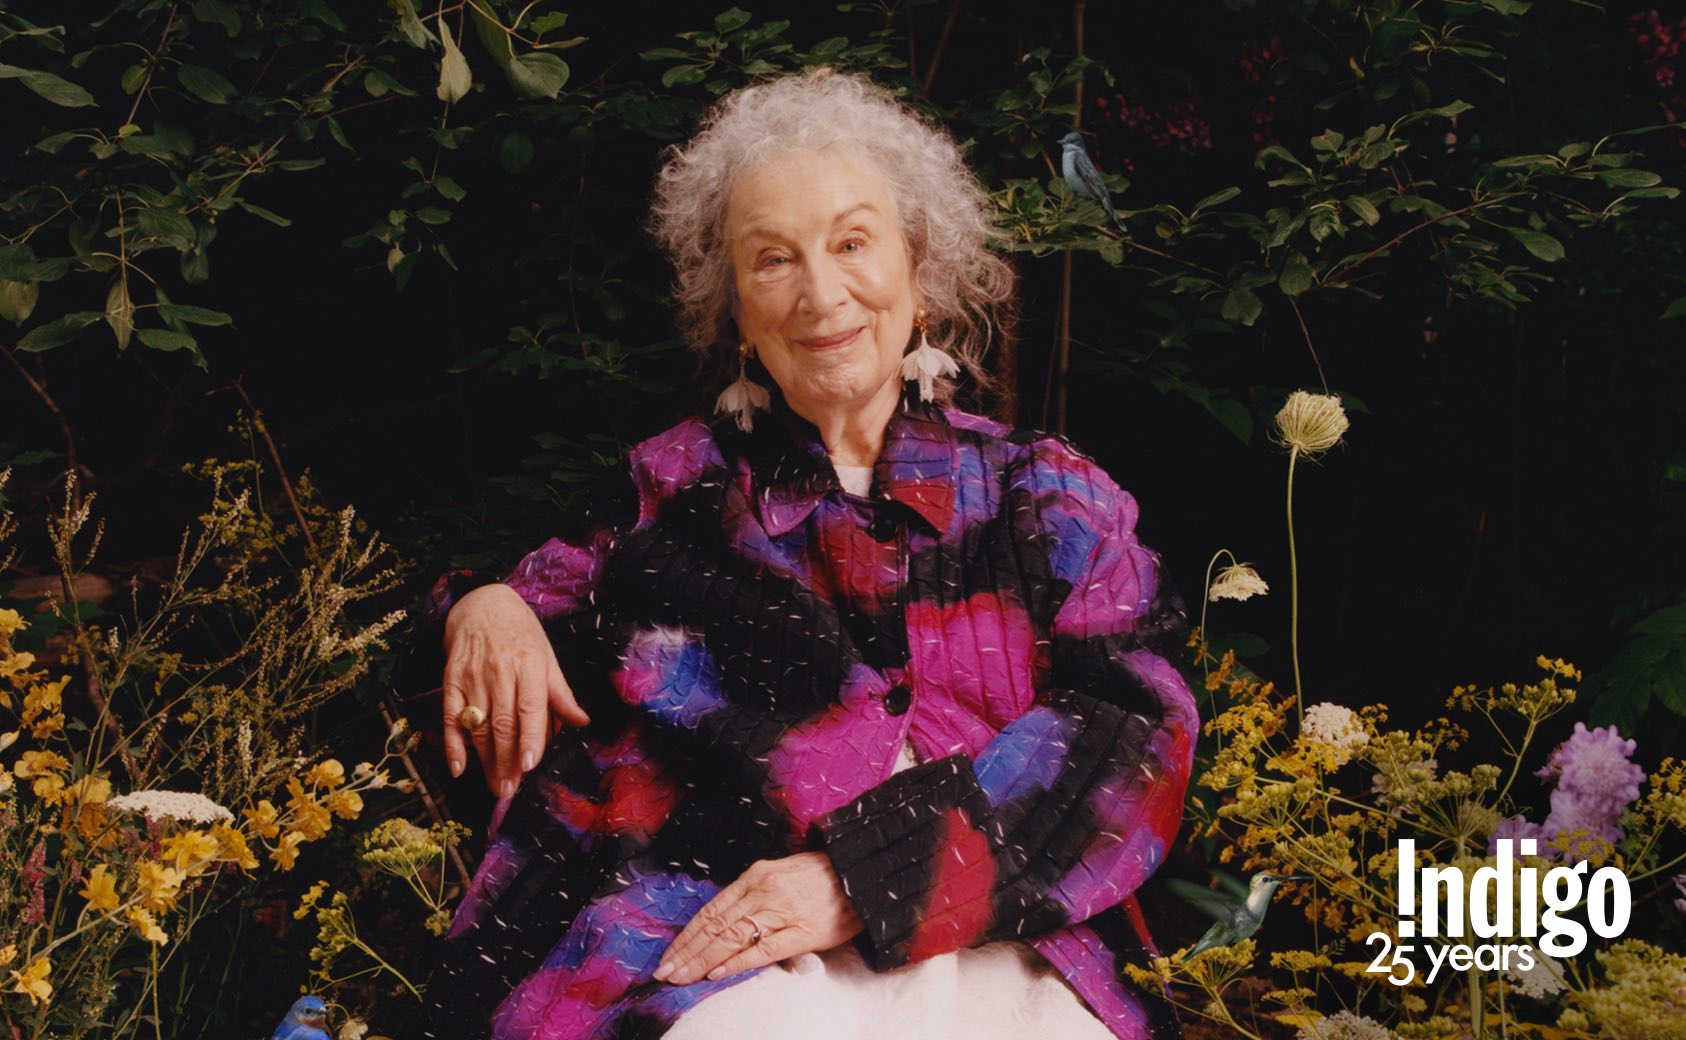 Writer. Advocate. Birdwatcher. Find out how Margaret Atwood lives life on her terms.